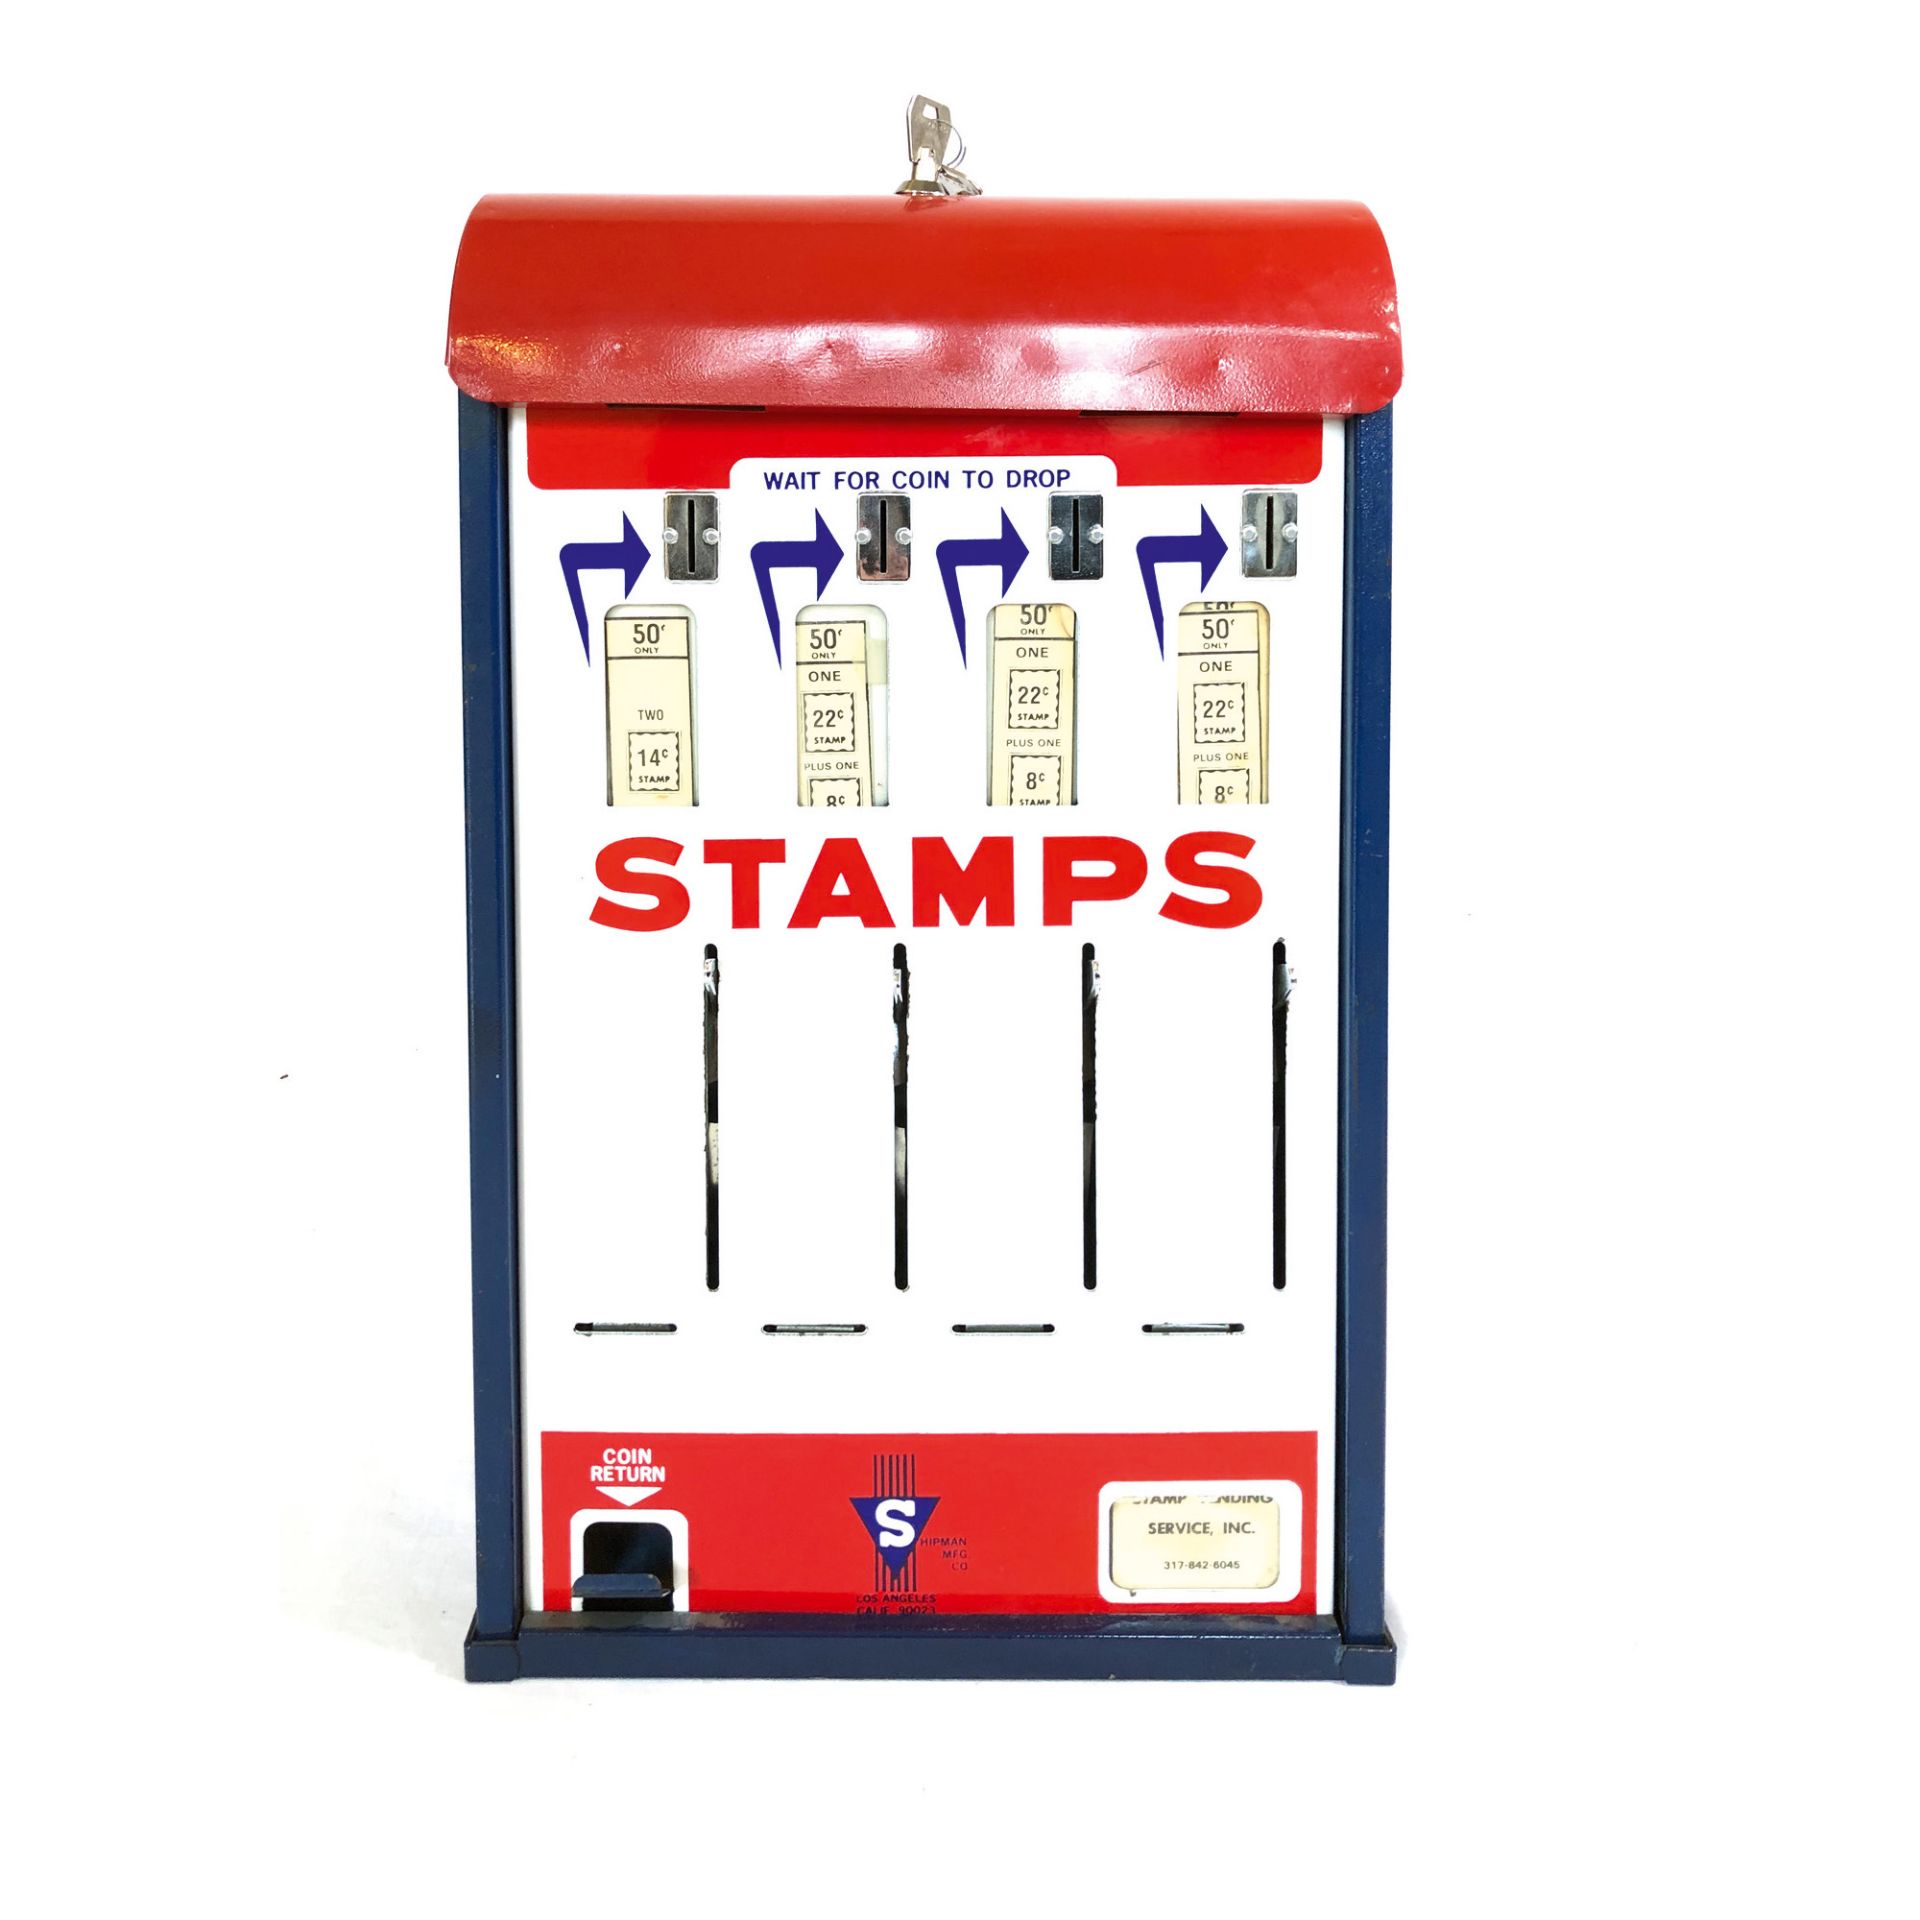 Postage stamp vending machine from the U.S.A - Image 2 of 8